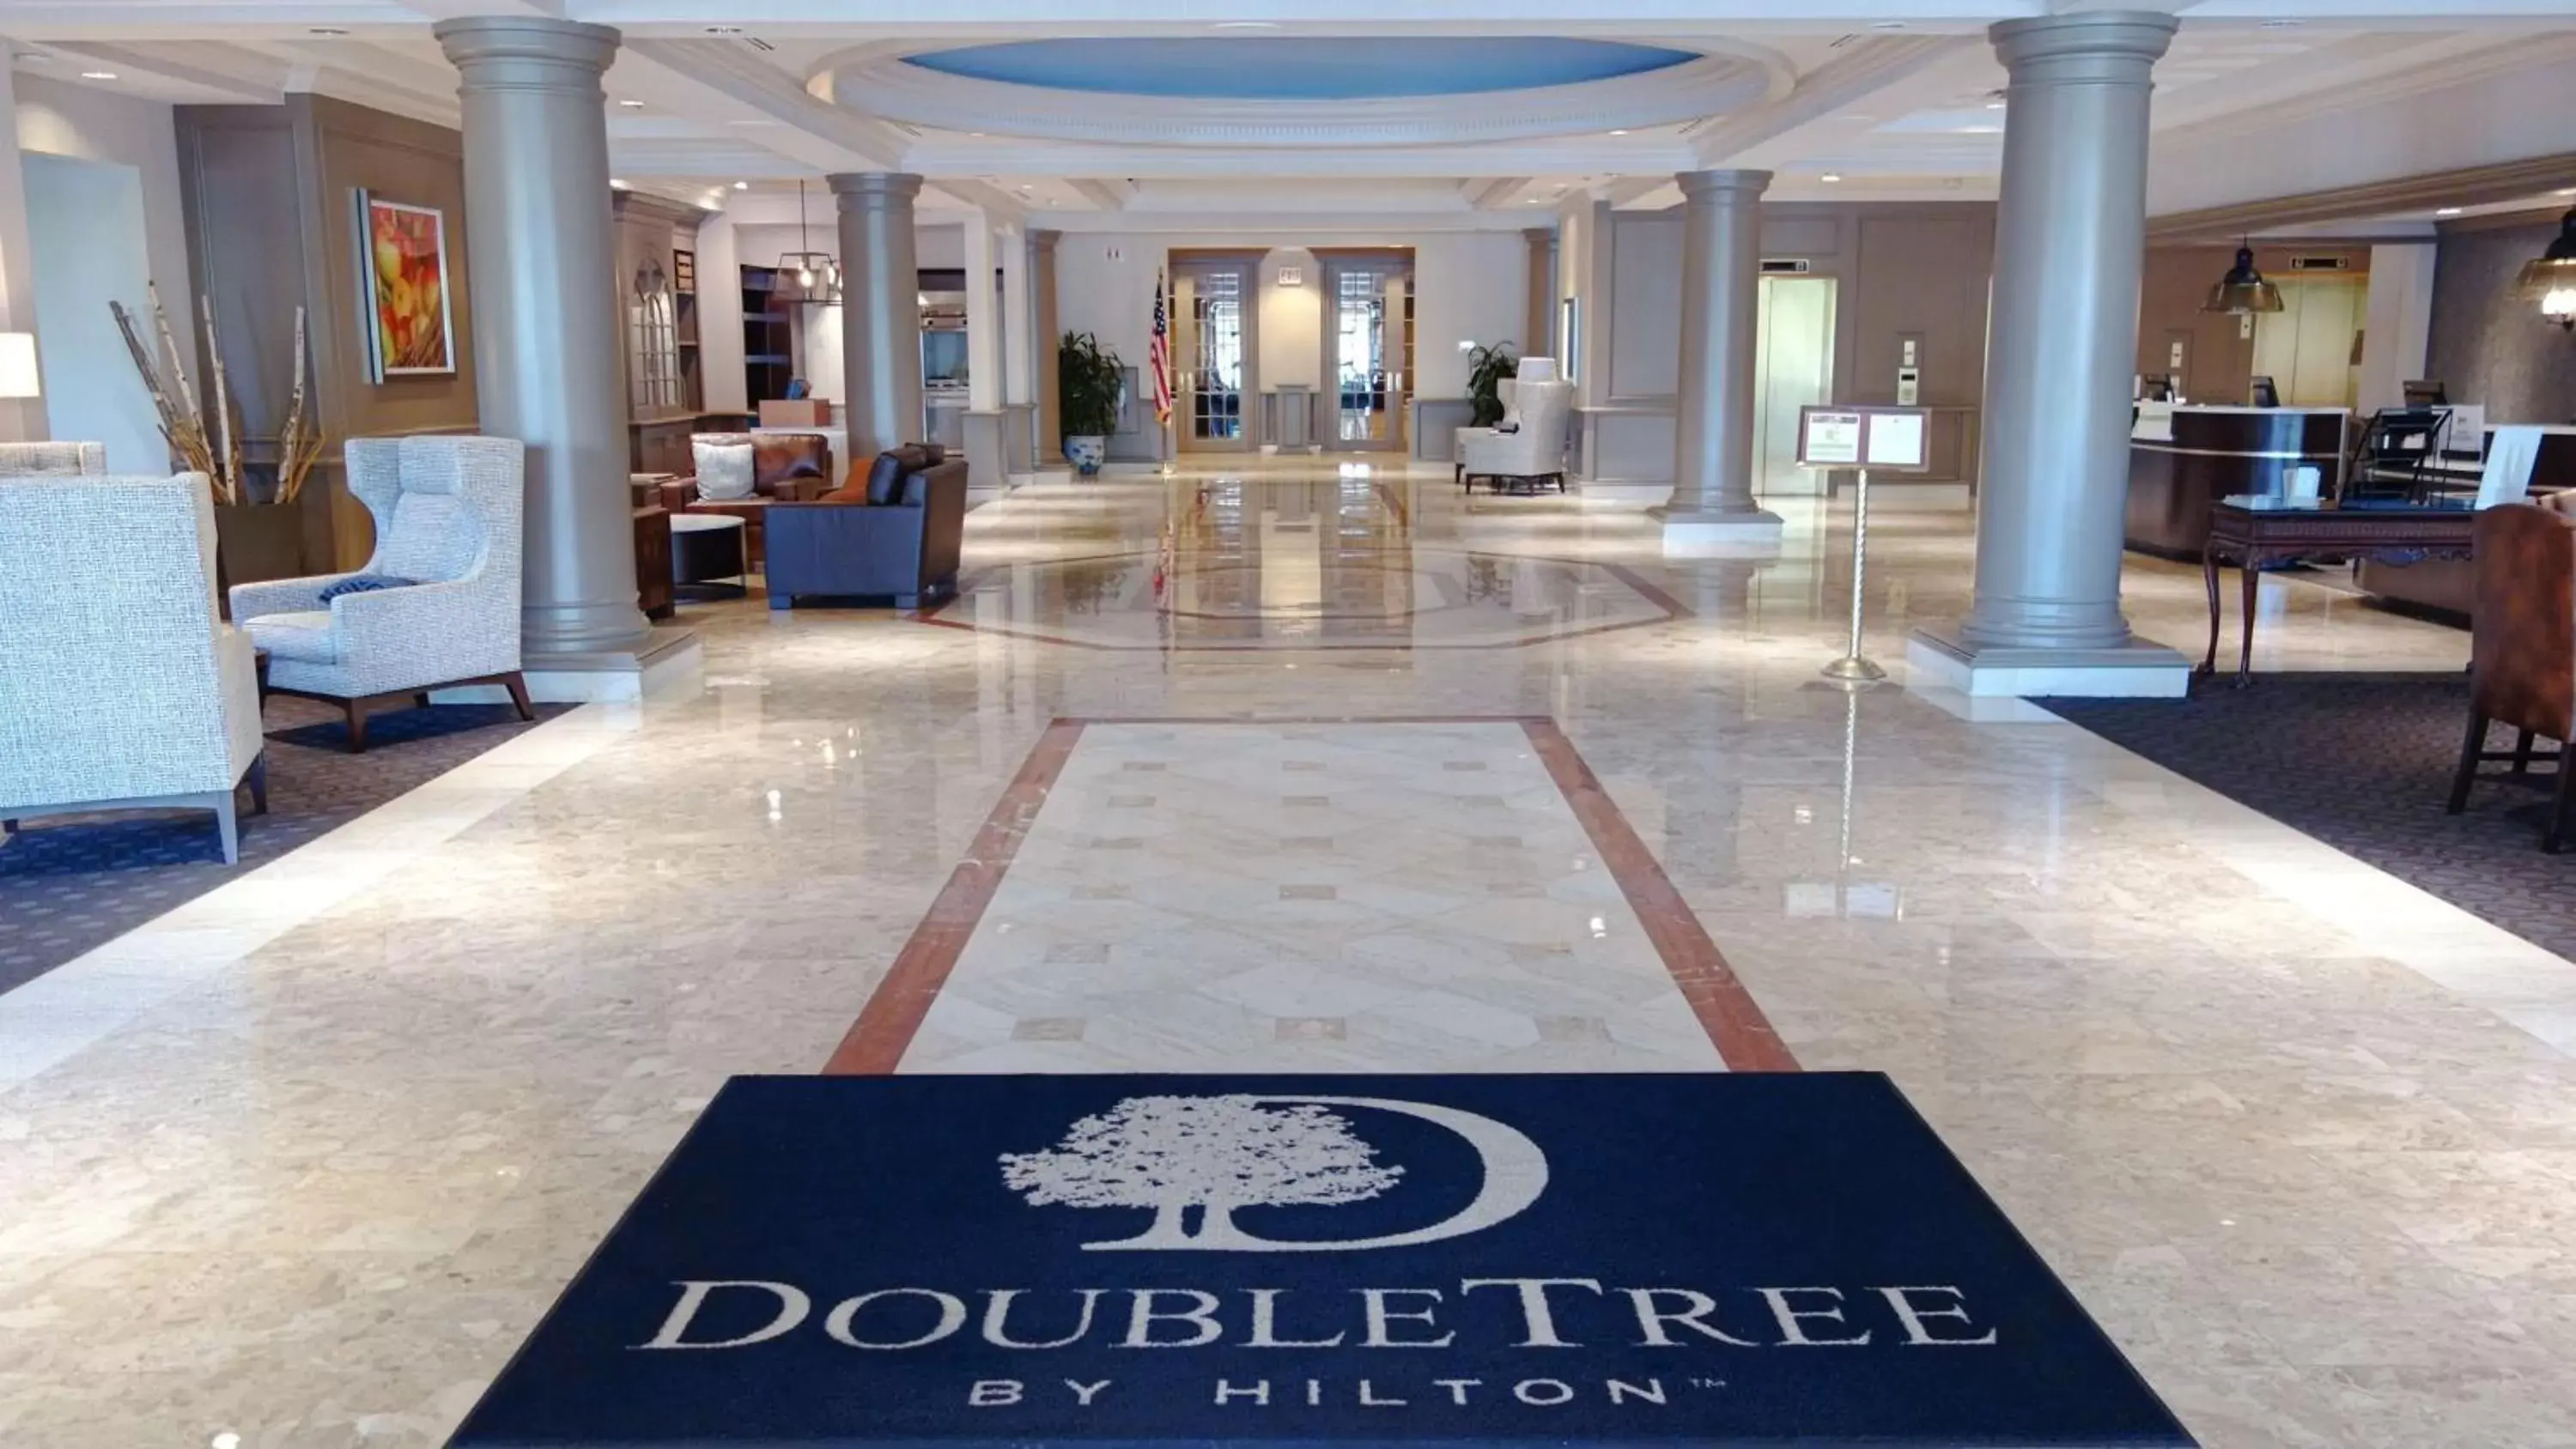 Lobby or reception, Lobby/Reception in Doubletree by Hilton, Leominster